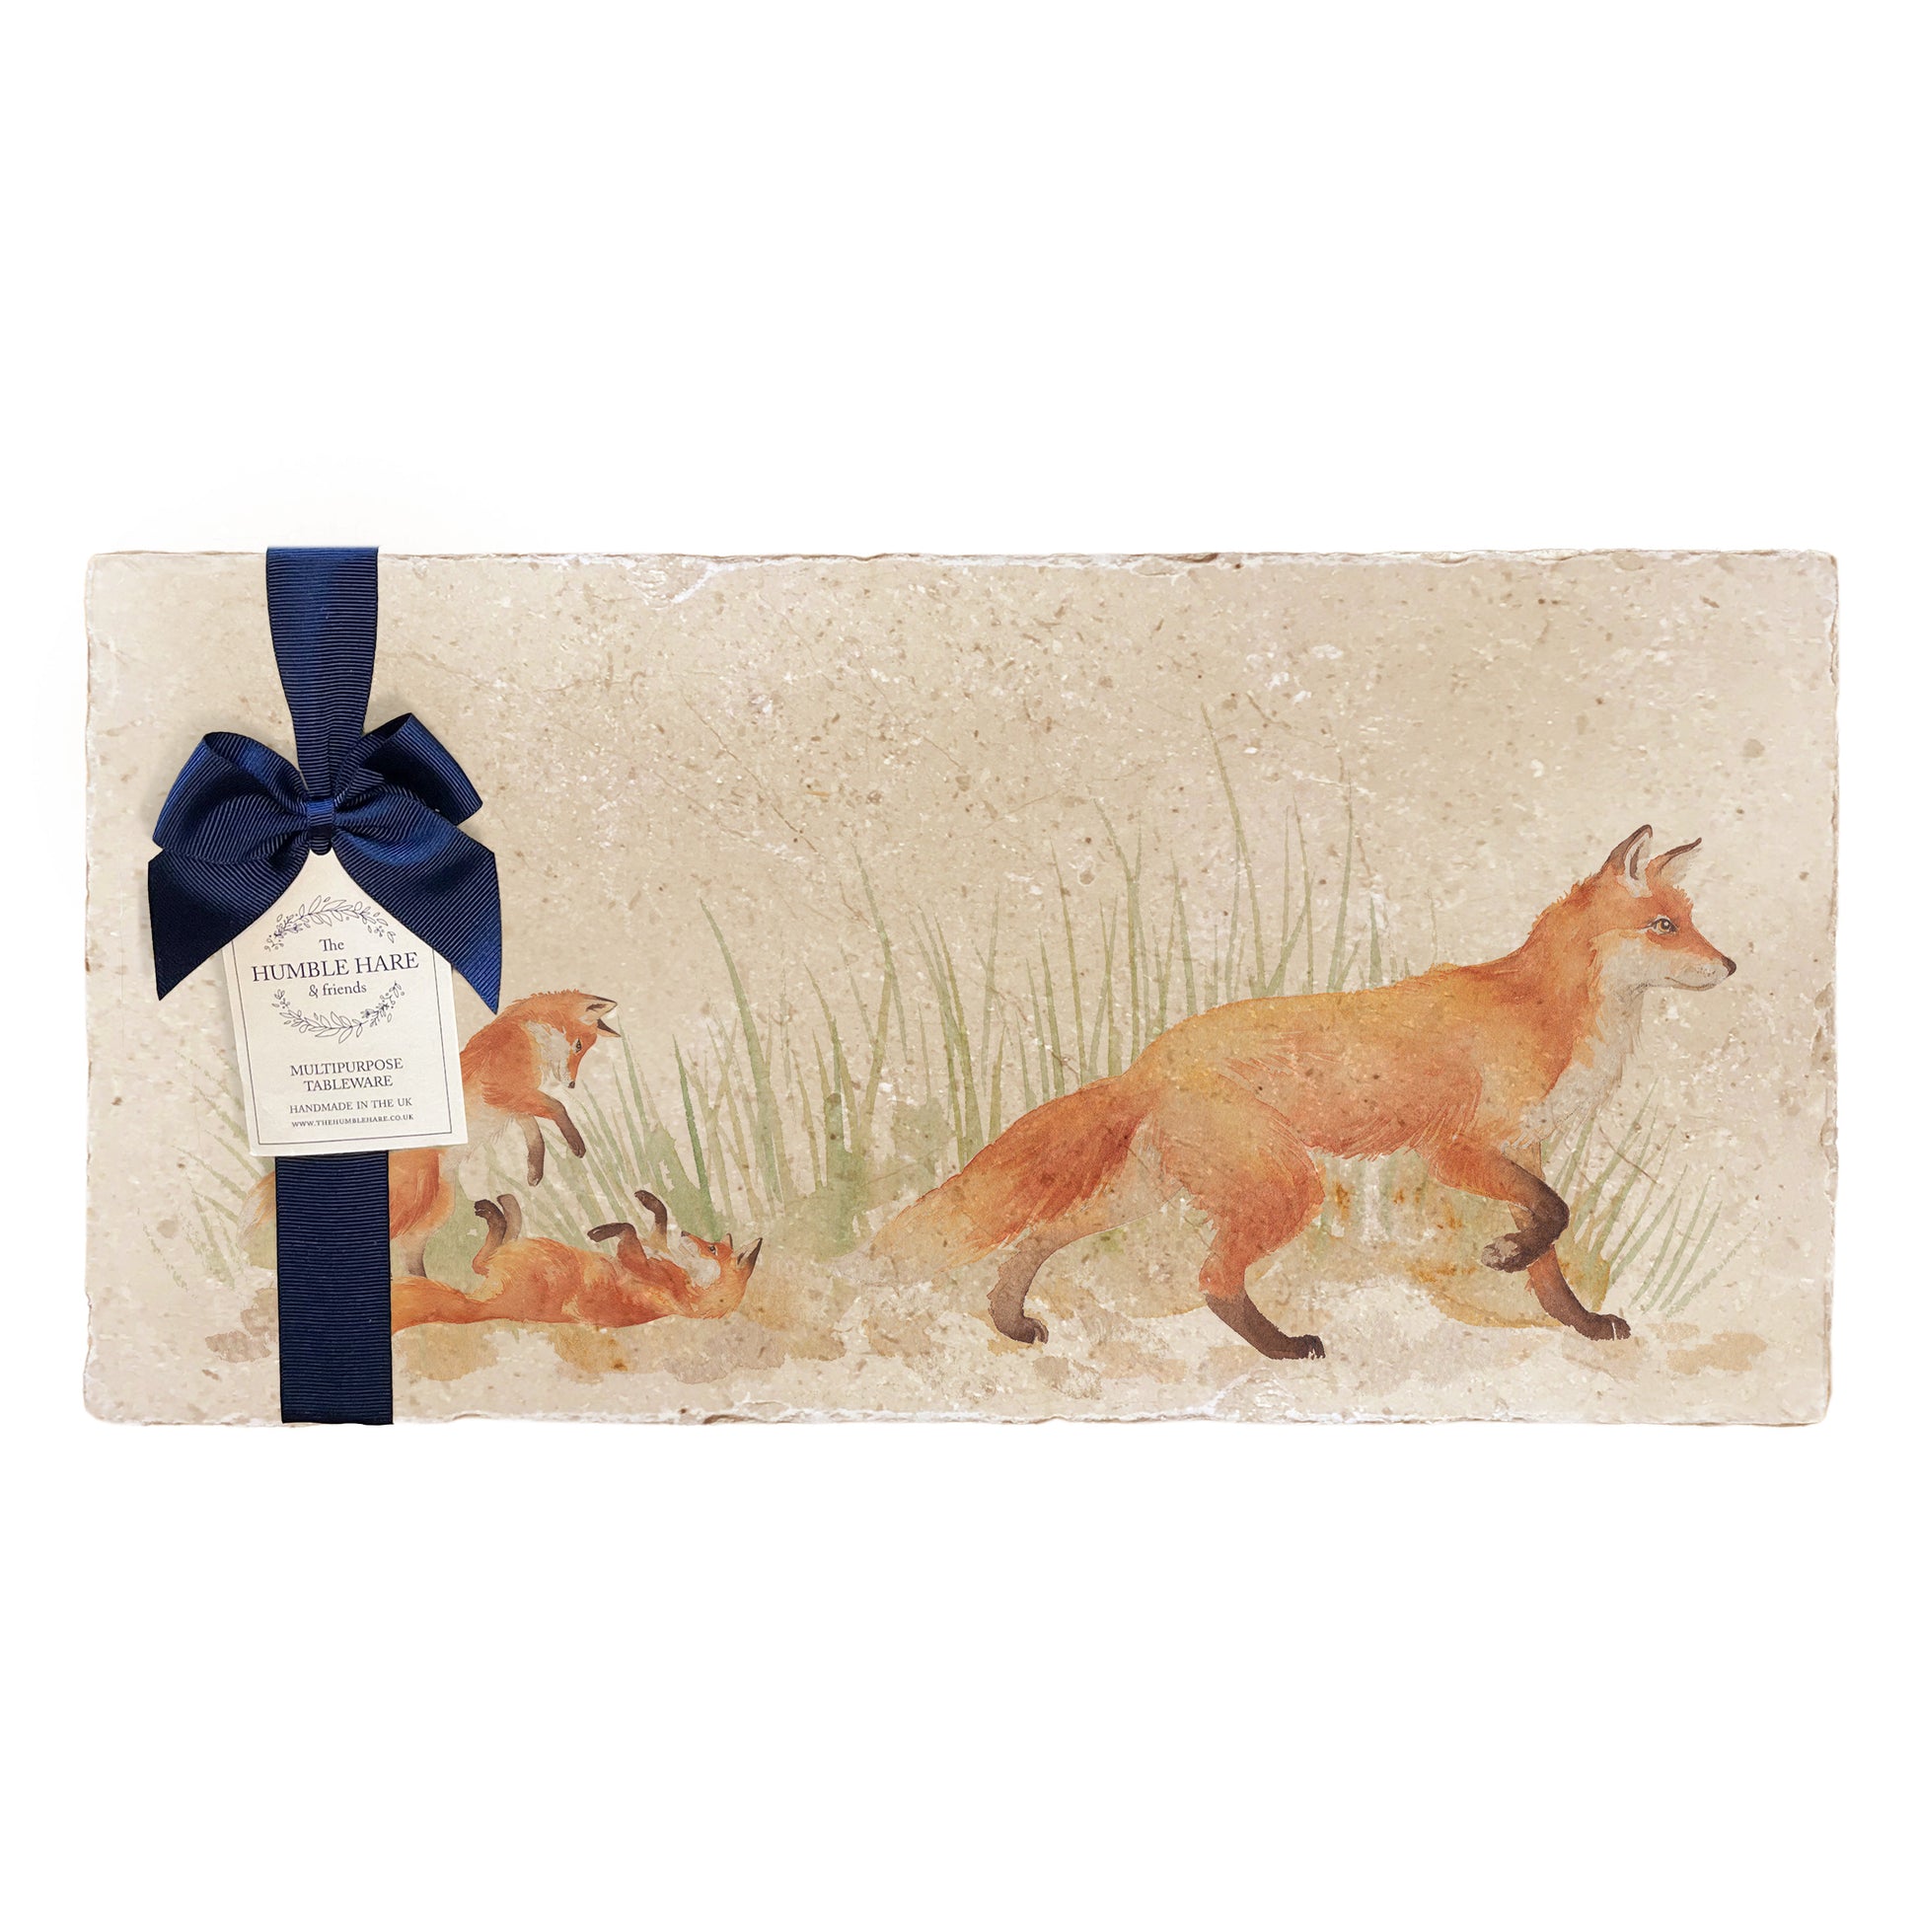 A multipurpose marble sharing platter with a fox and fox cub design, packaged with a luxurious dark blue bow and branded gift tag.